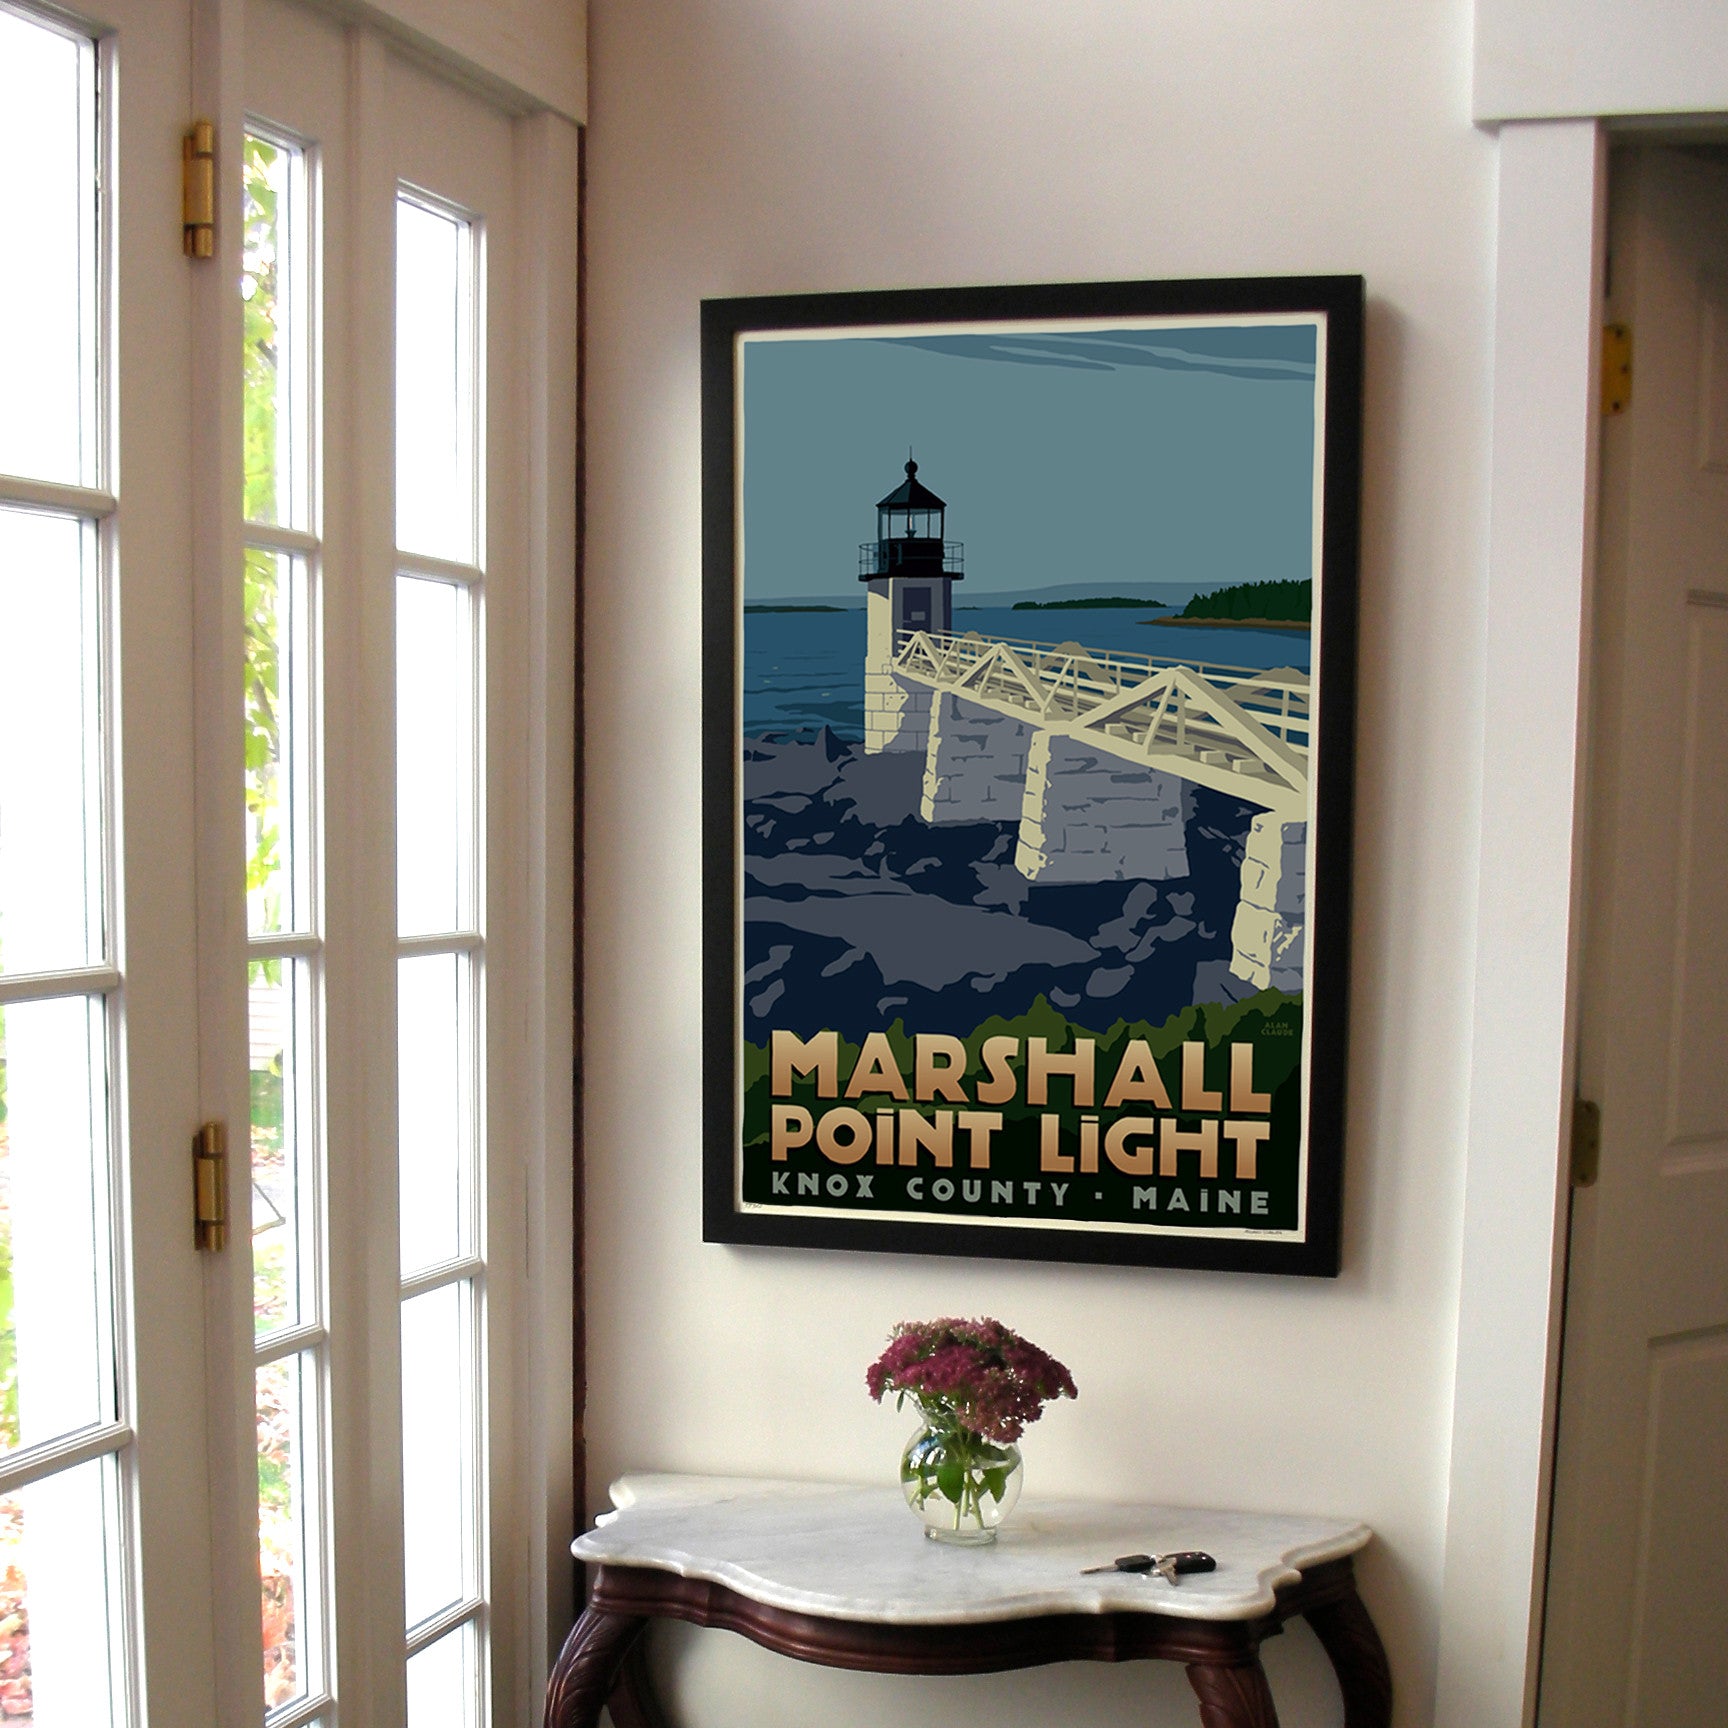 Marshall Point Light Art Print 24" x 36" Framed Travel Poster By Alan Claude  - Maine